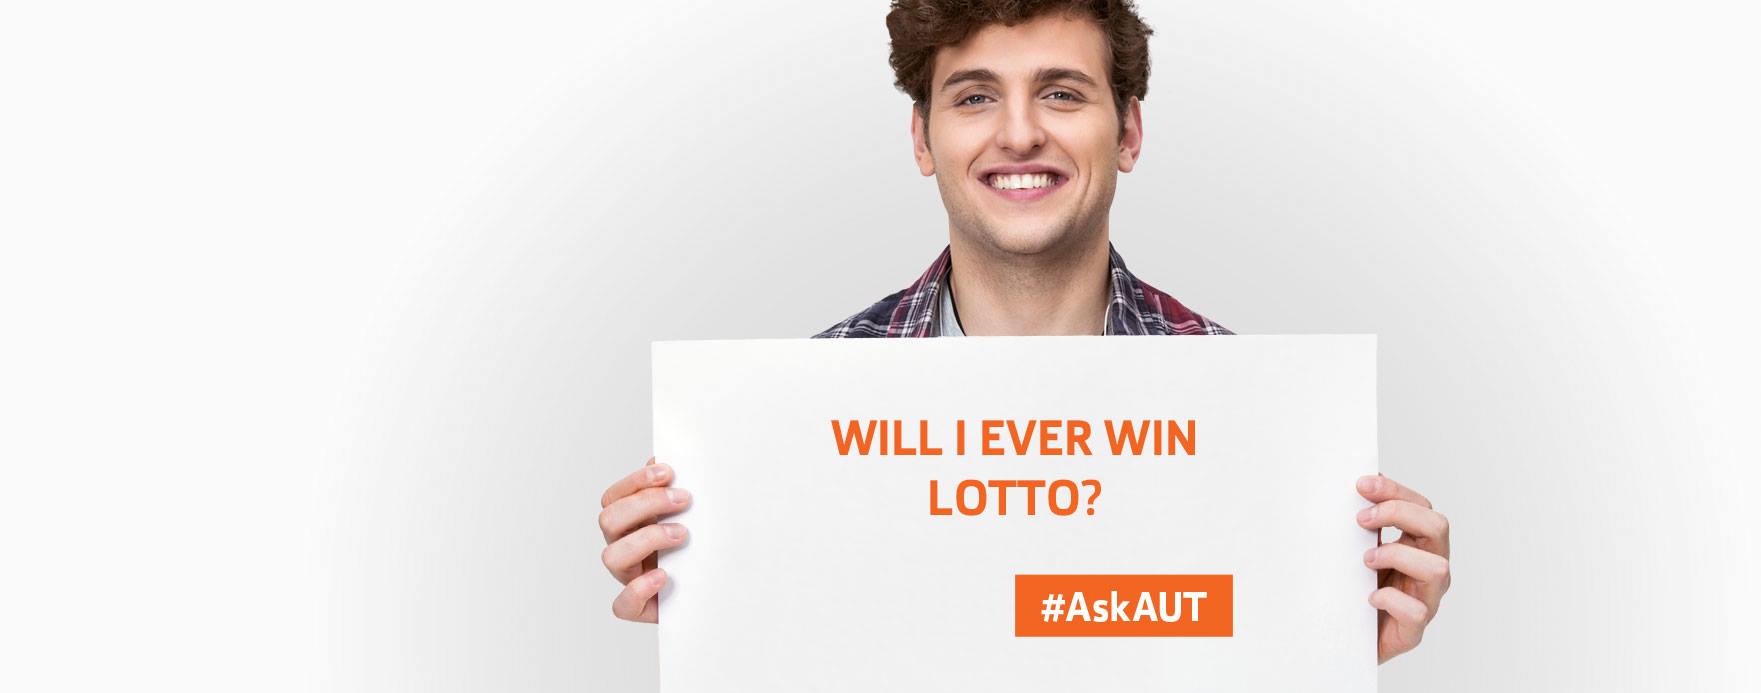 Any luck with lotto?